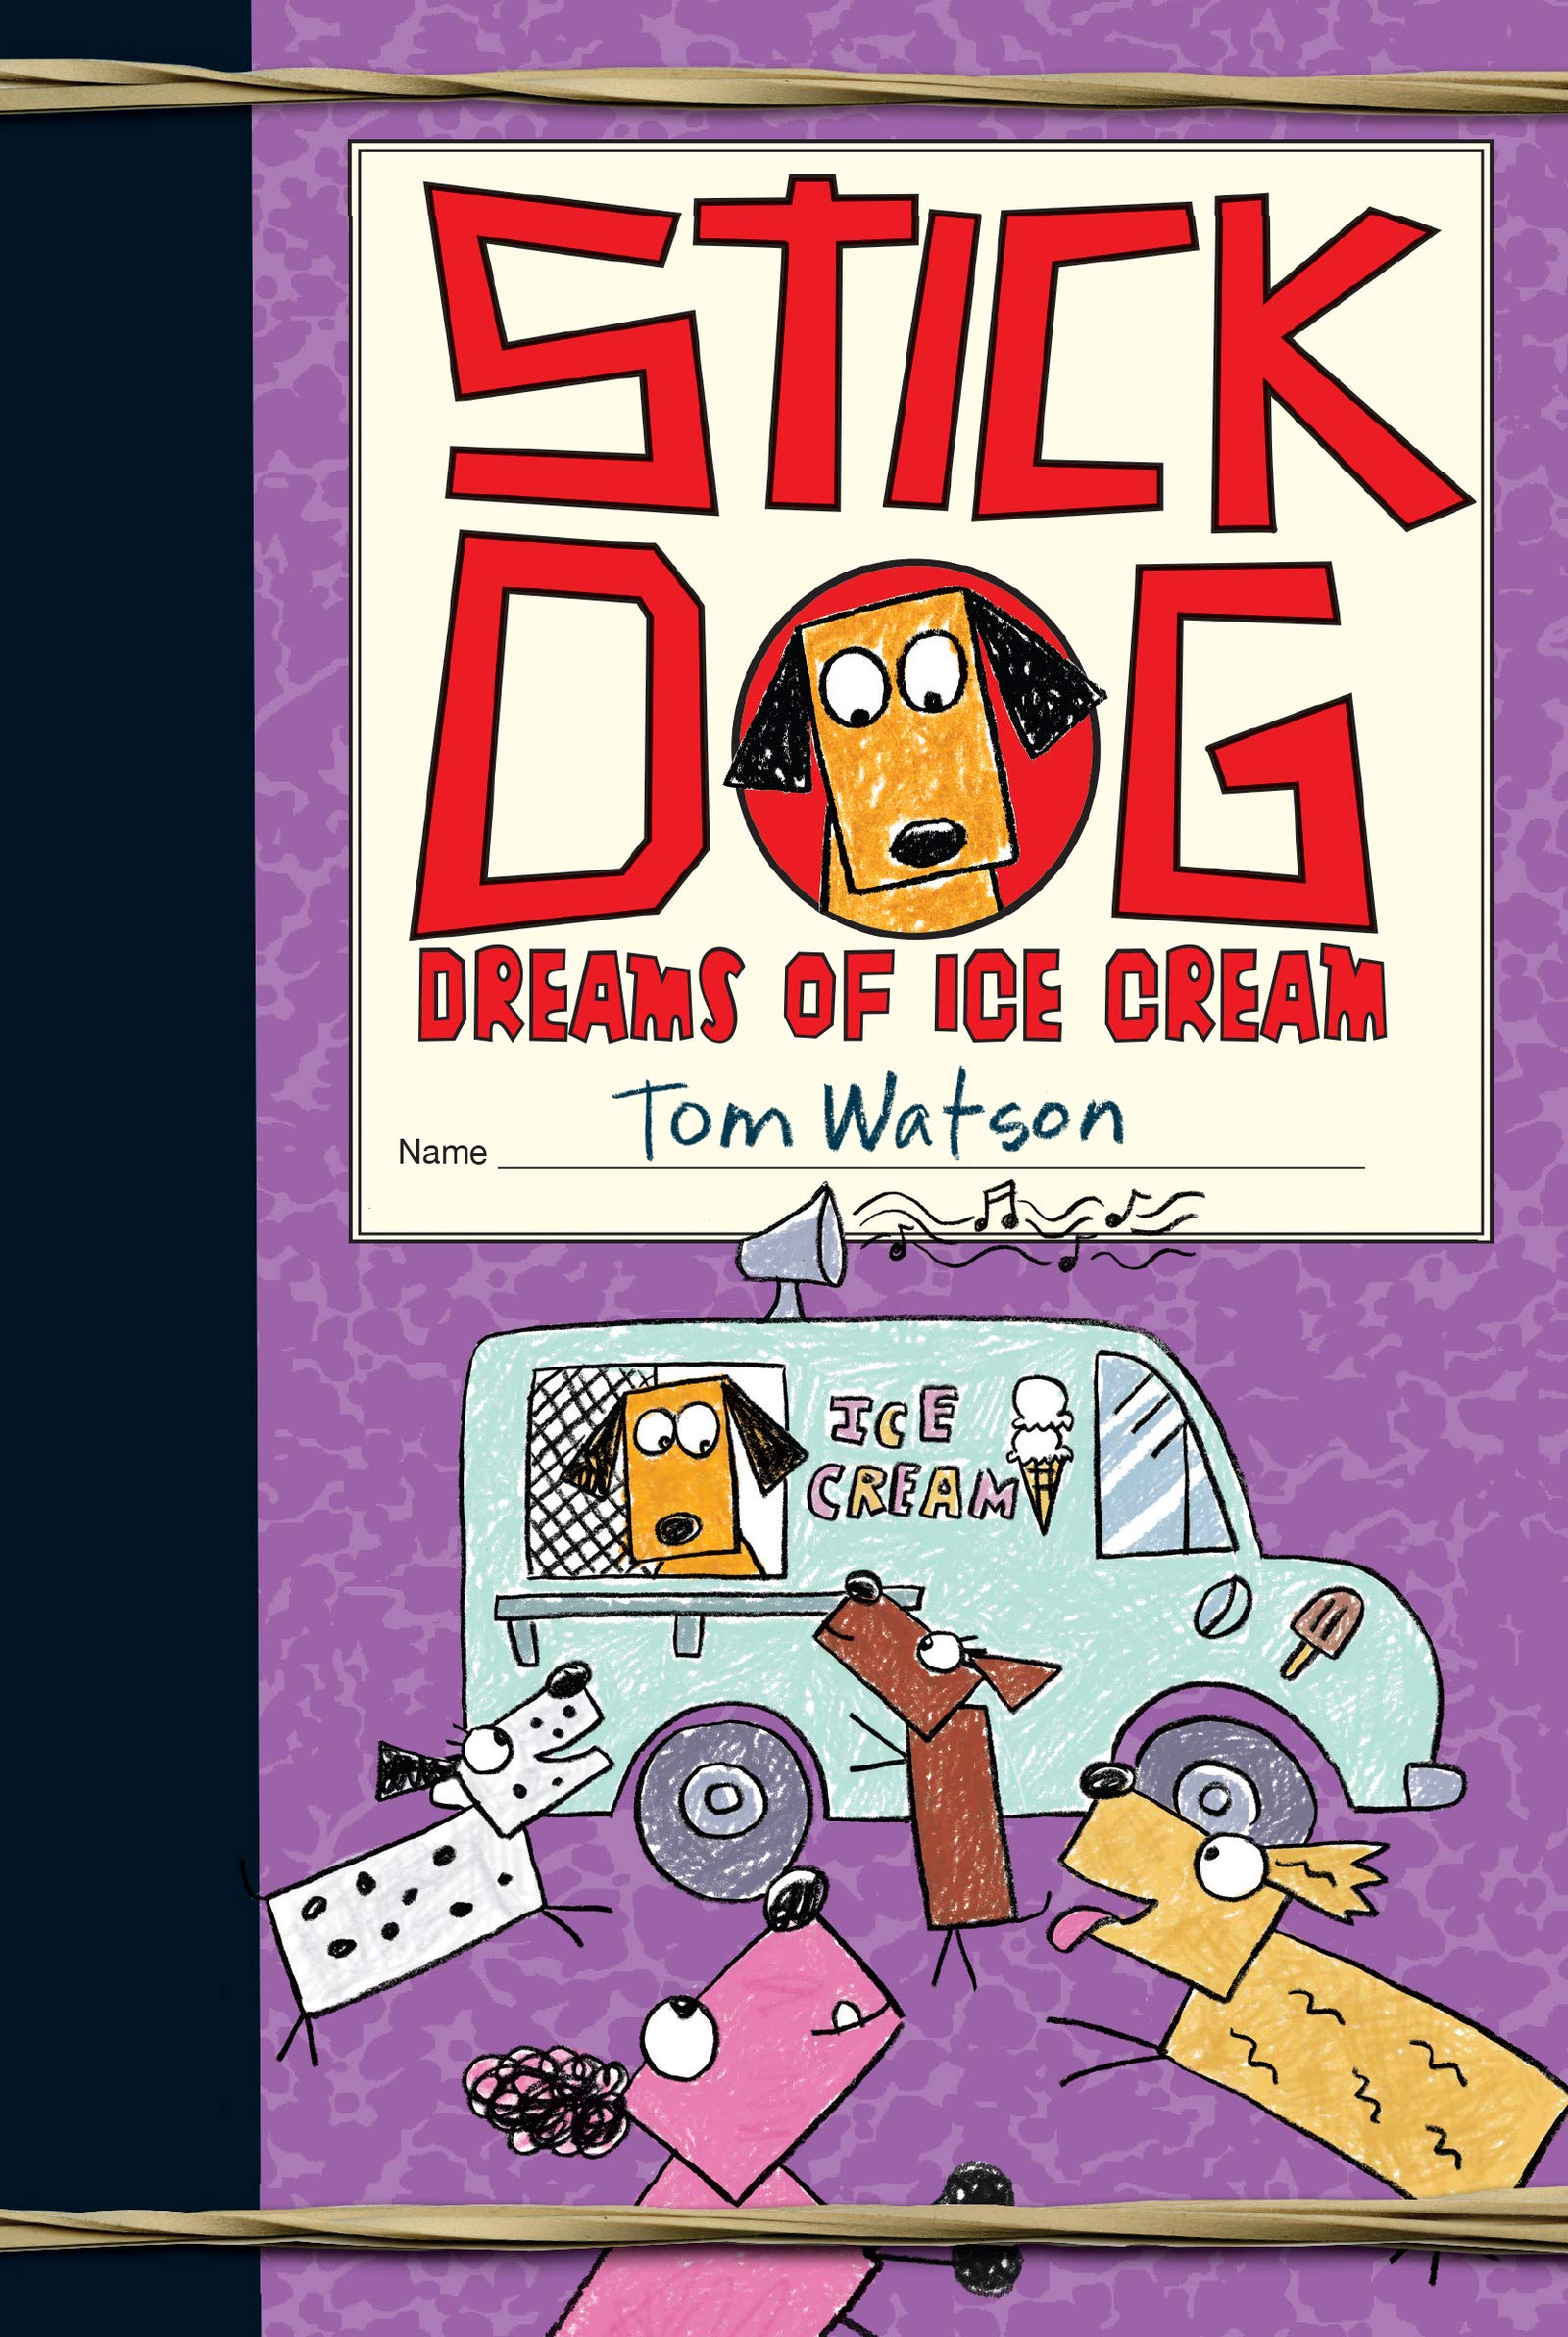 title with illustration of dogs and ice cream truck